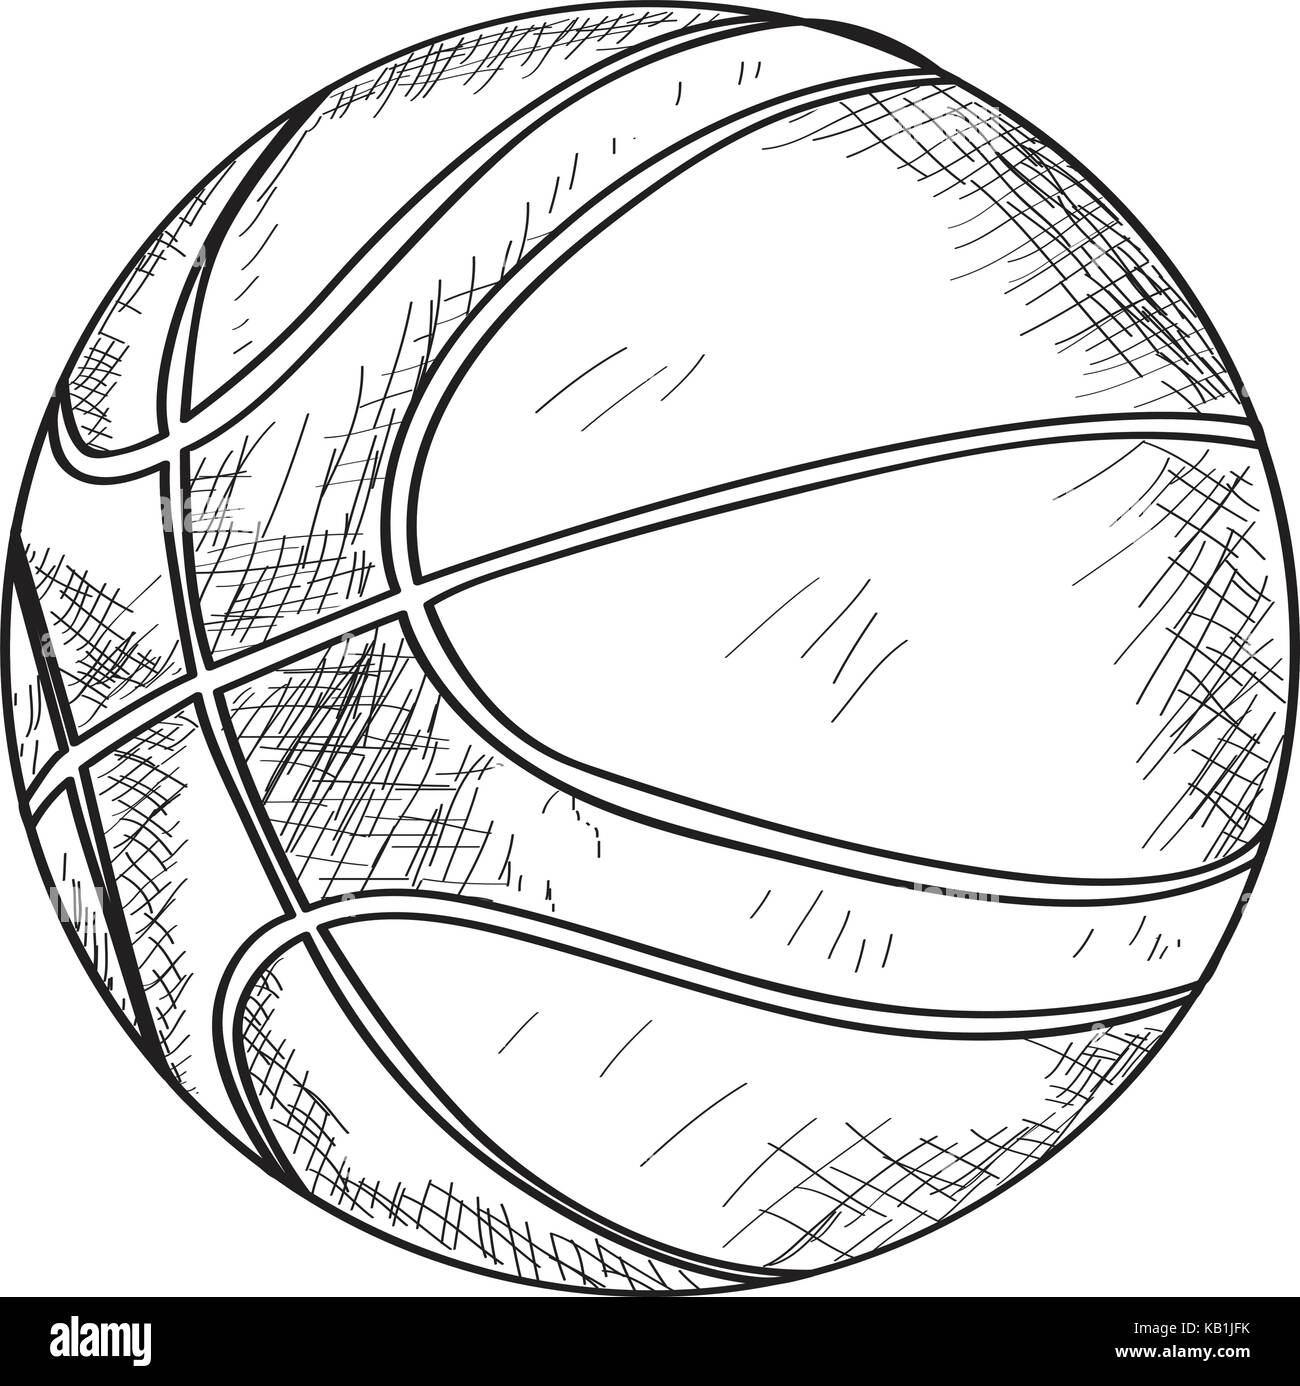 Tennis Ball Sketch Images  Browse 97037 Stock Photos Vectors and Video   Adobe Stock